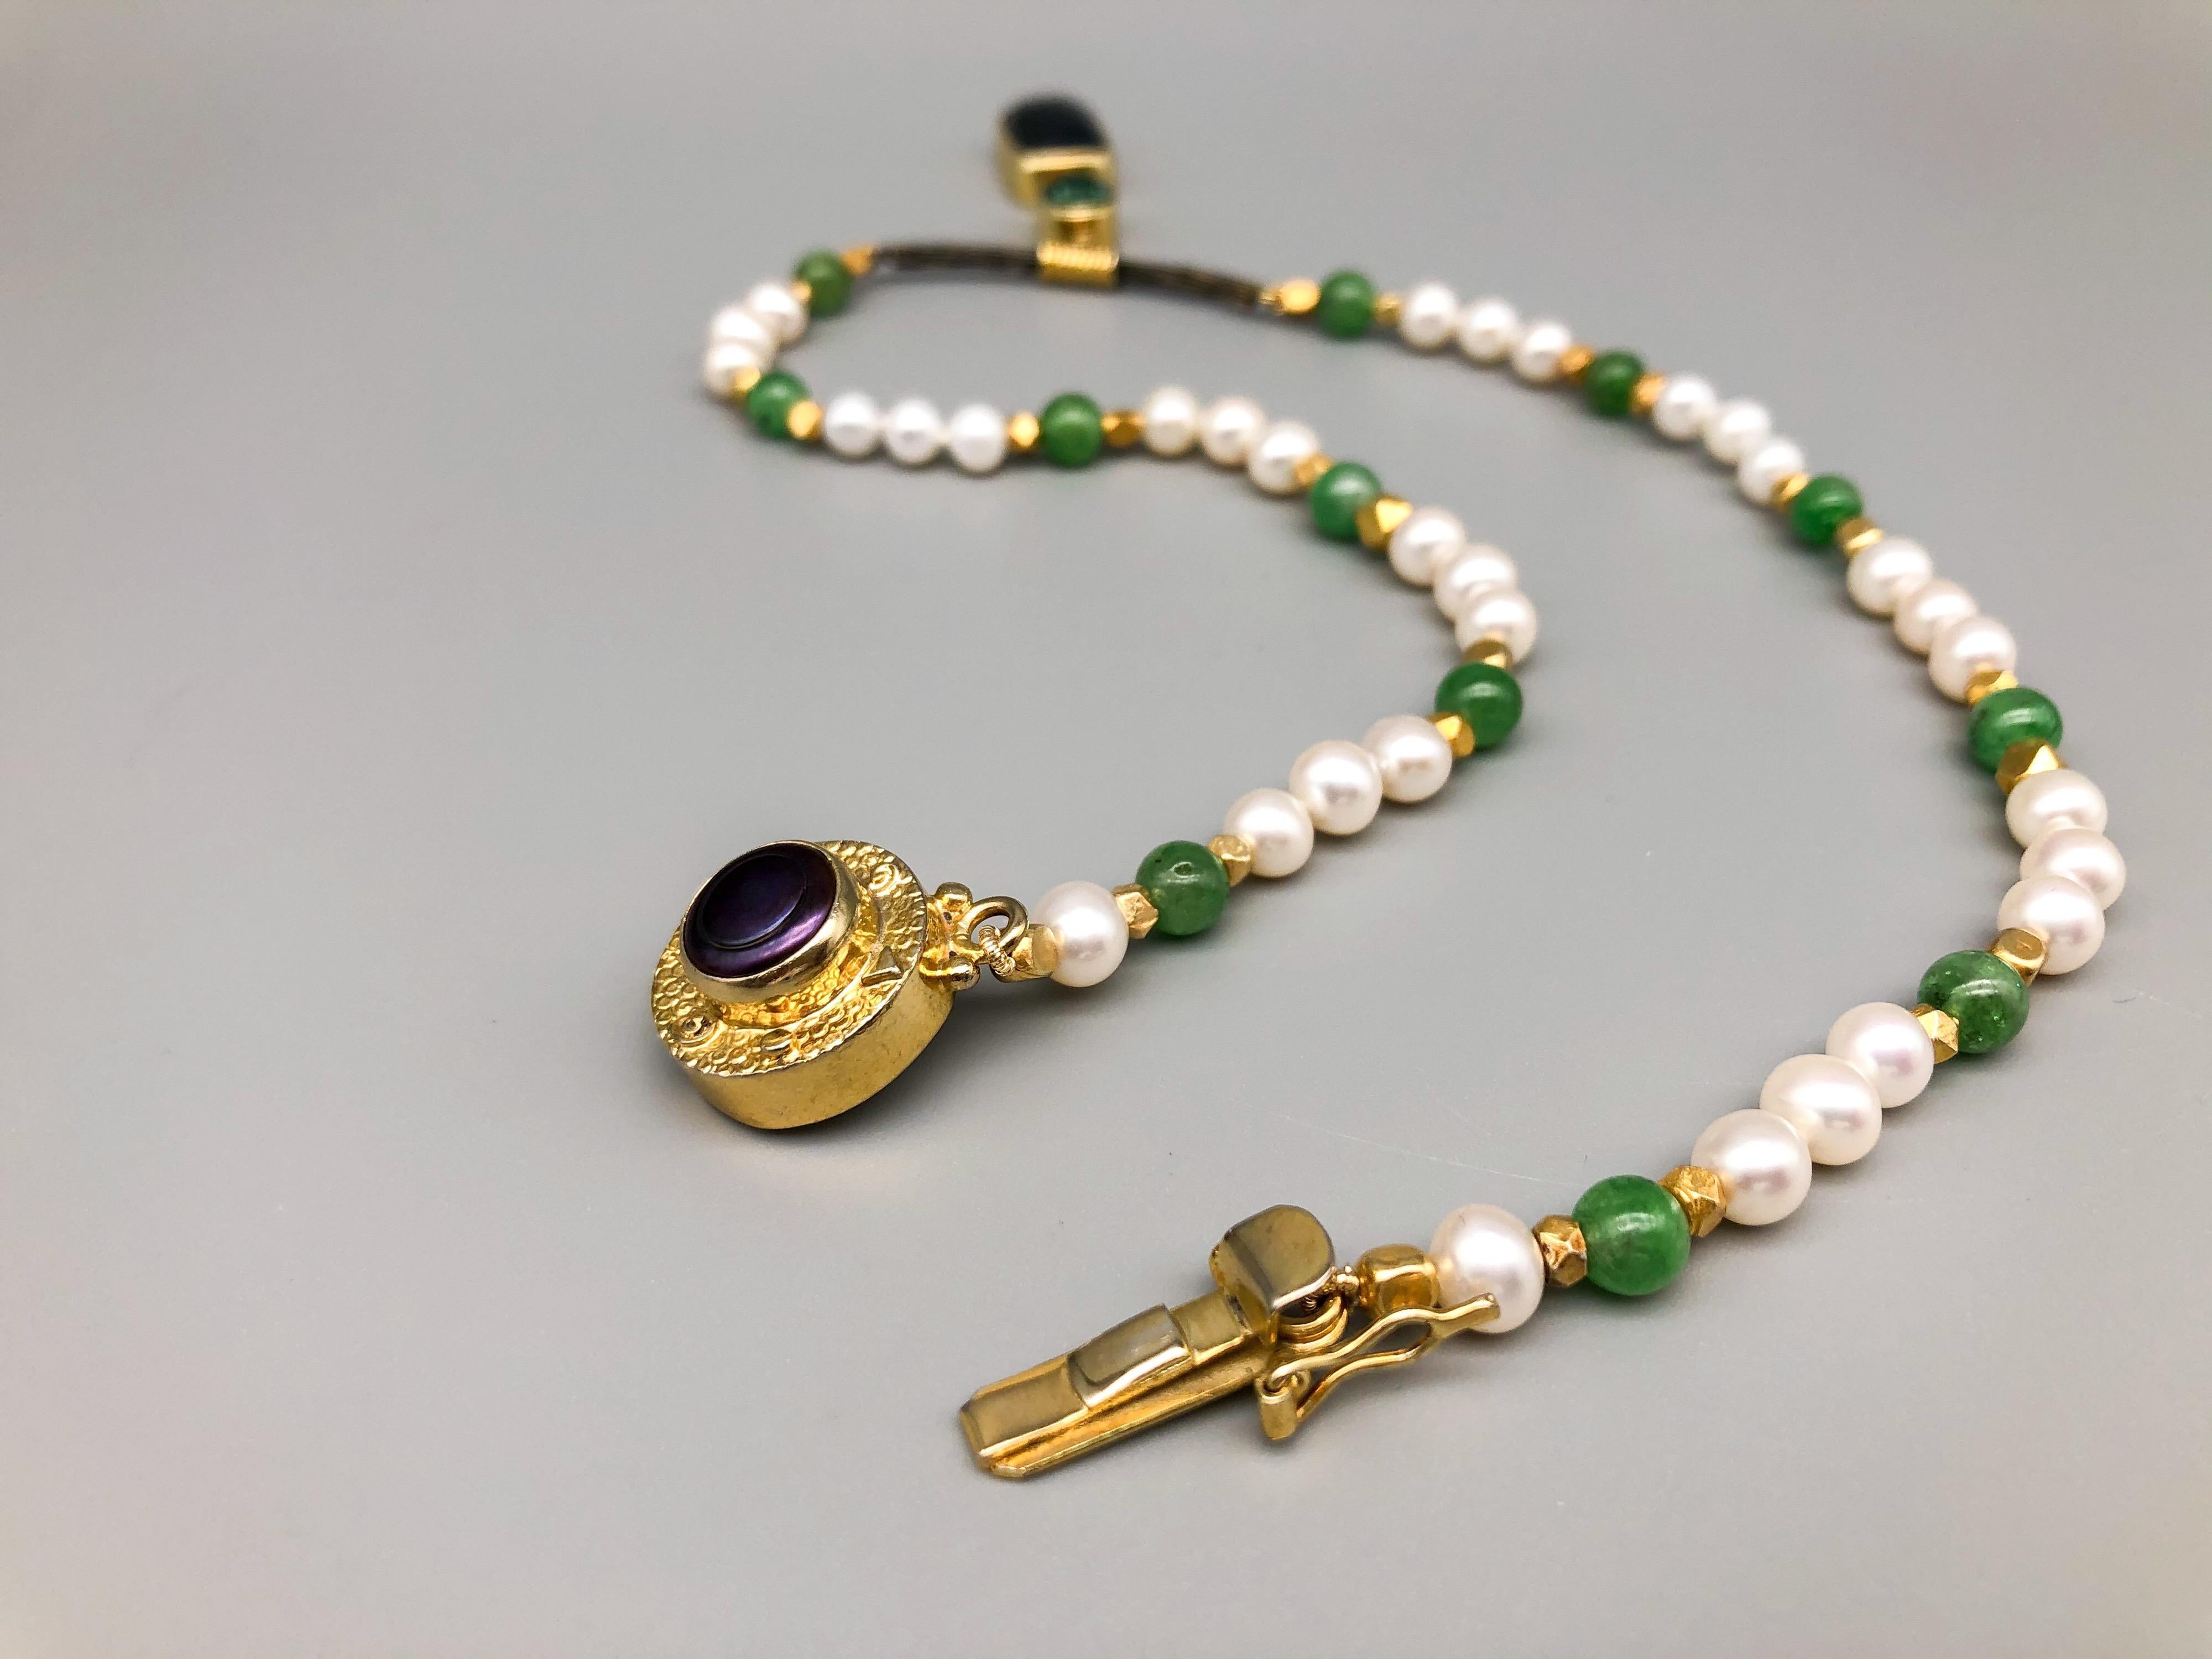 A.Jeschel Pendant Necklace with Pearls and Emerald beads is dreamy. For Sale 1